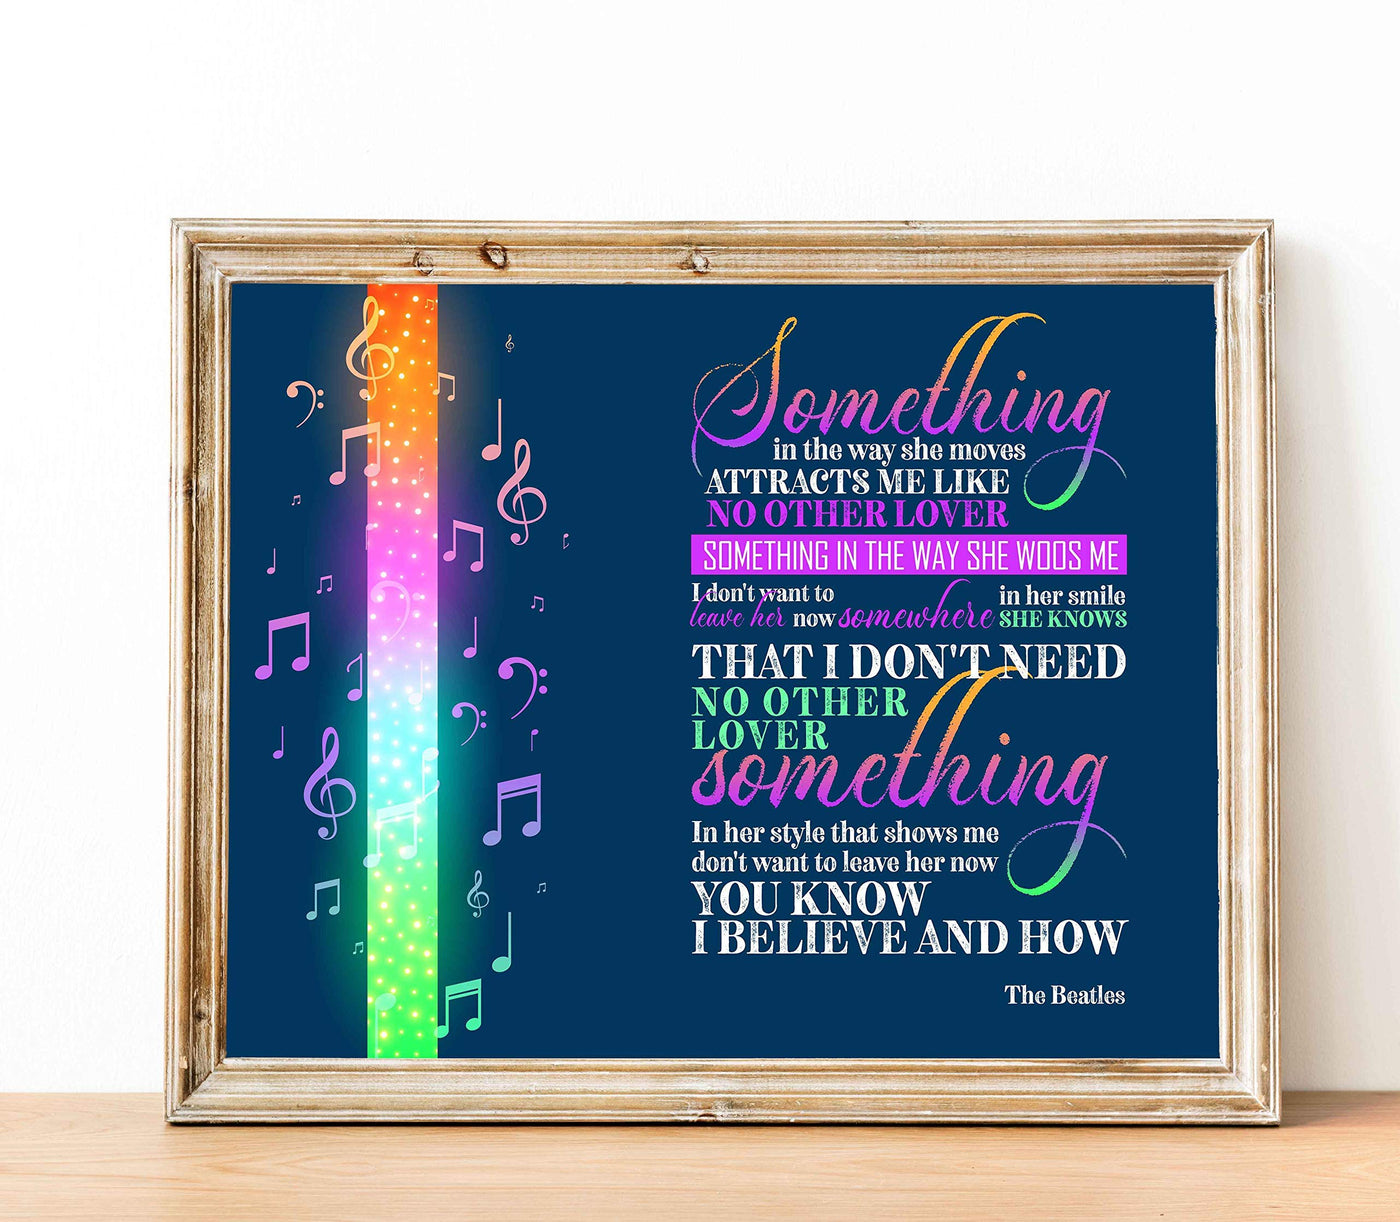 The Beatles Song Lyric Art-"Something-In the Way She Moves" -14 x 11" Music Lyrics Poster Print-Ready to Frame. Vintage Wall Sign for Home-Office-Studio-Cave D?cor. Perfect Gift For All Beatles Fans!